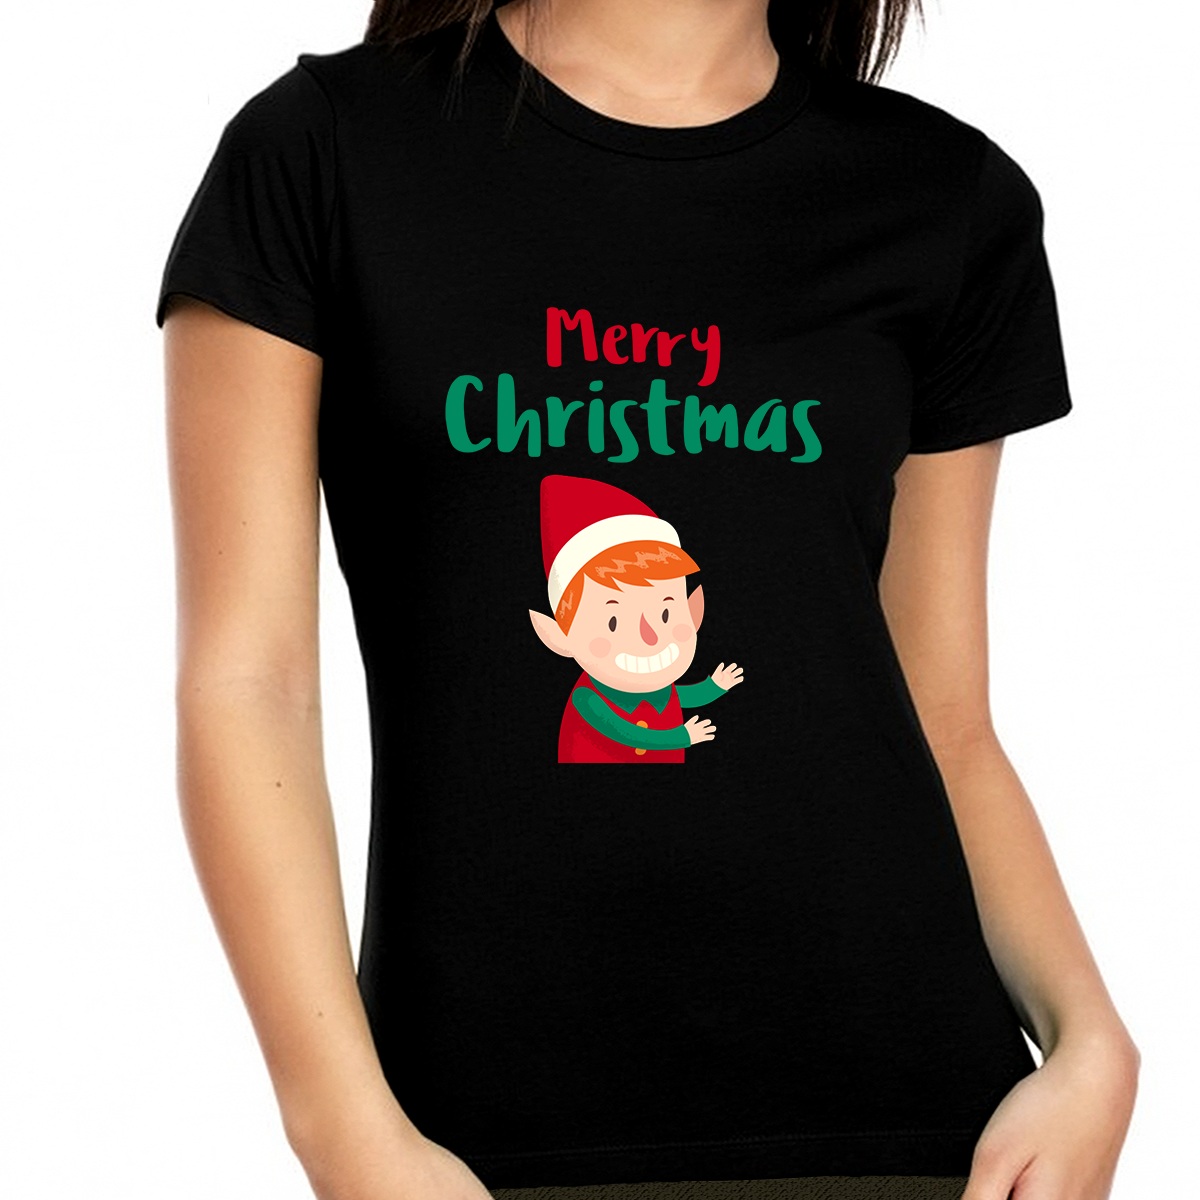 Funny Elf Cute Christmas Pajamas for Women Christmas T-Shirts Funny Womens Christmas Shirt Christmas Gifts